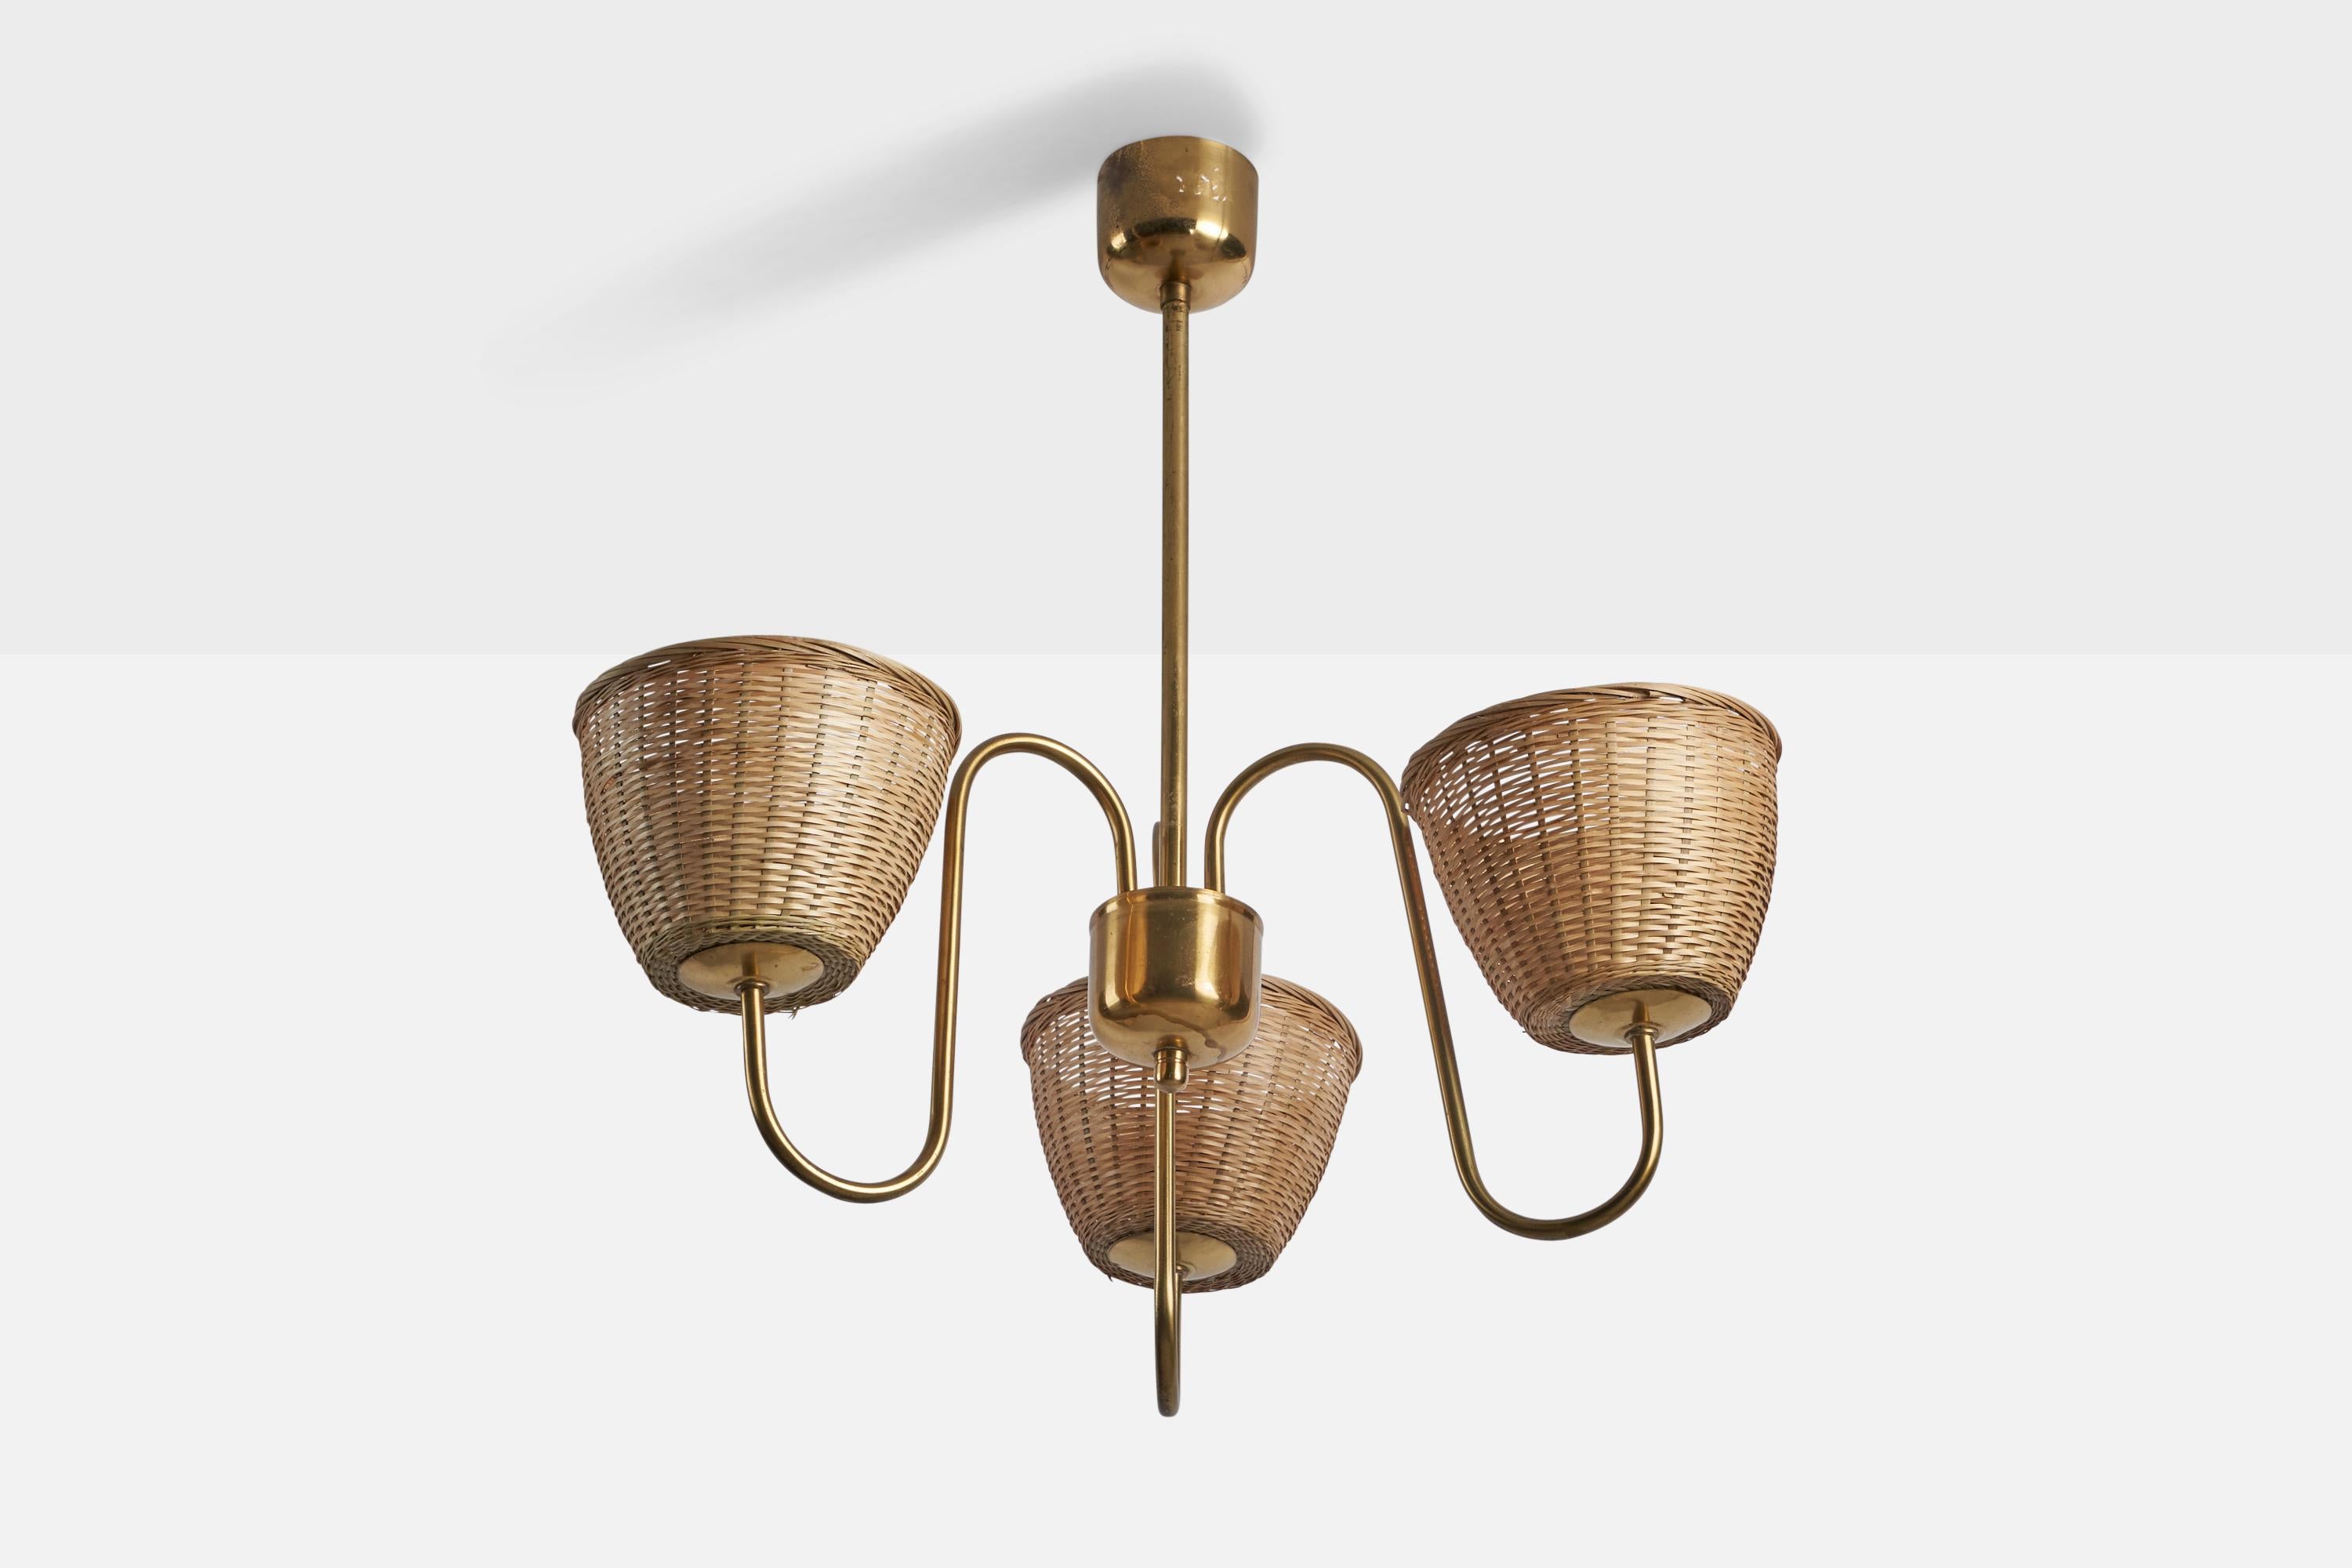 A three-armed brass and rattan chandelier designed and produced in Sweden, 1940s.

Overall Dimensions (inches): 24” H x 21” Diameter
Bulb Specifications: E-26 Bulb
Number of Sockets: 3